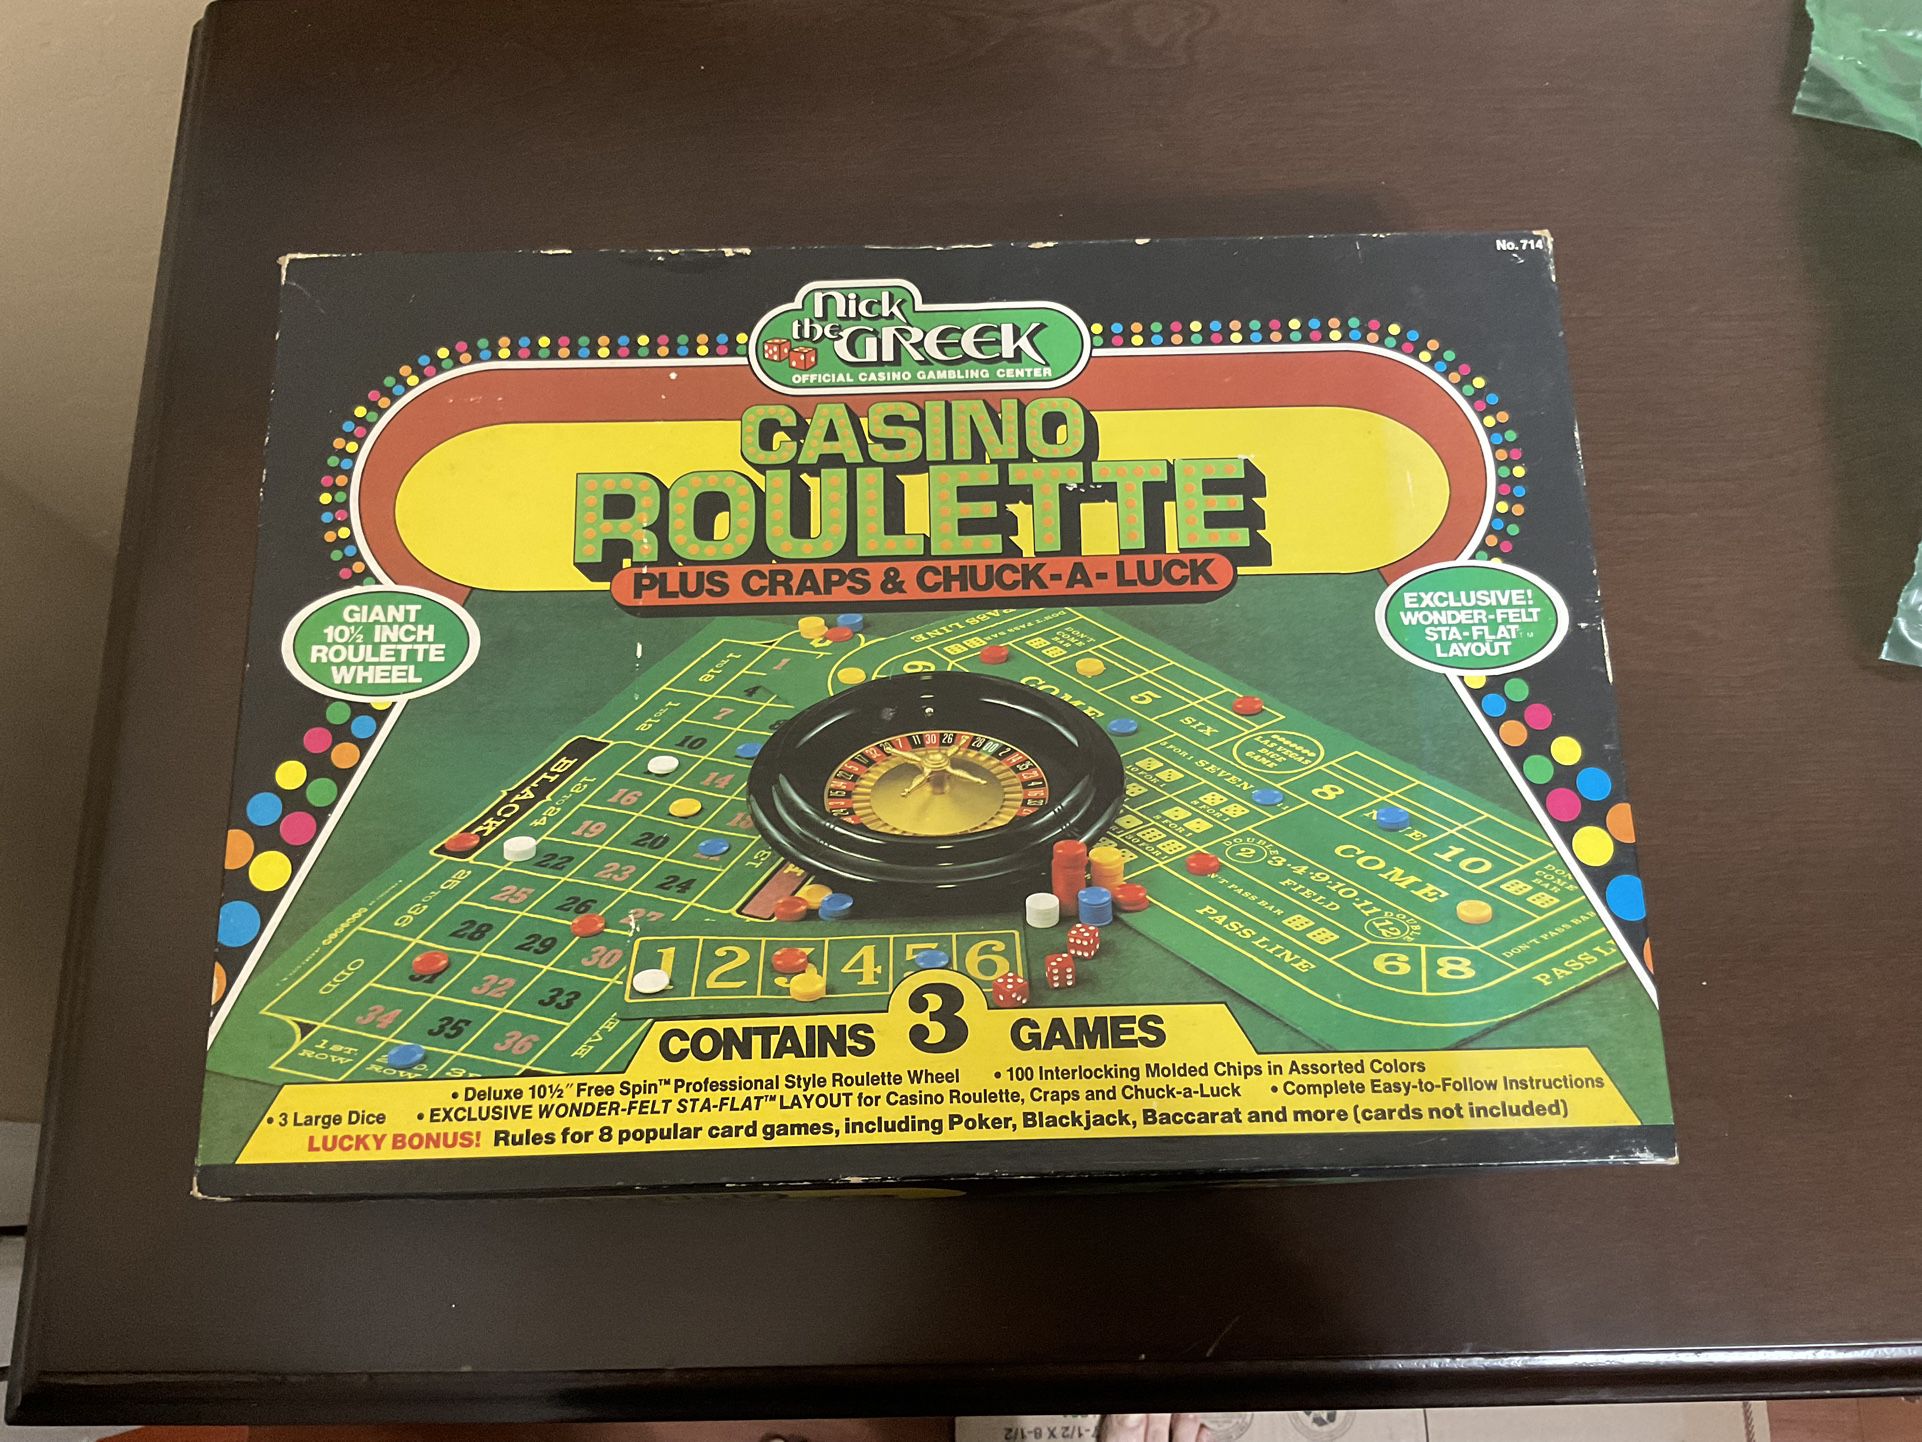 Vintage Nick the Greek Casino Roulette Craps Chuck-a-Luck Game 1978  Good CondItion.  Complete.  Great Gift!  Merry Christmas 🎁🎄!